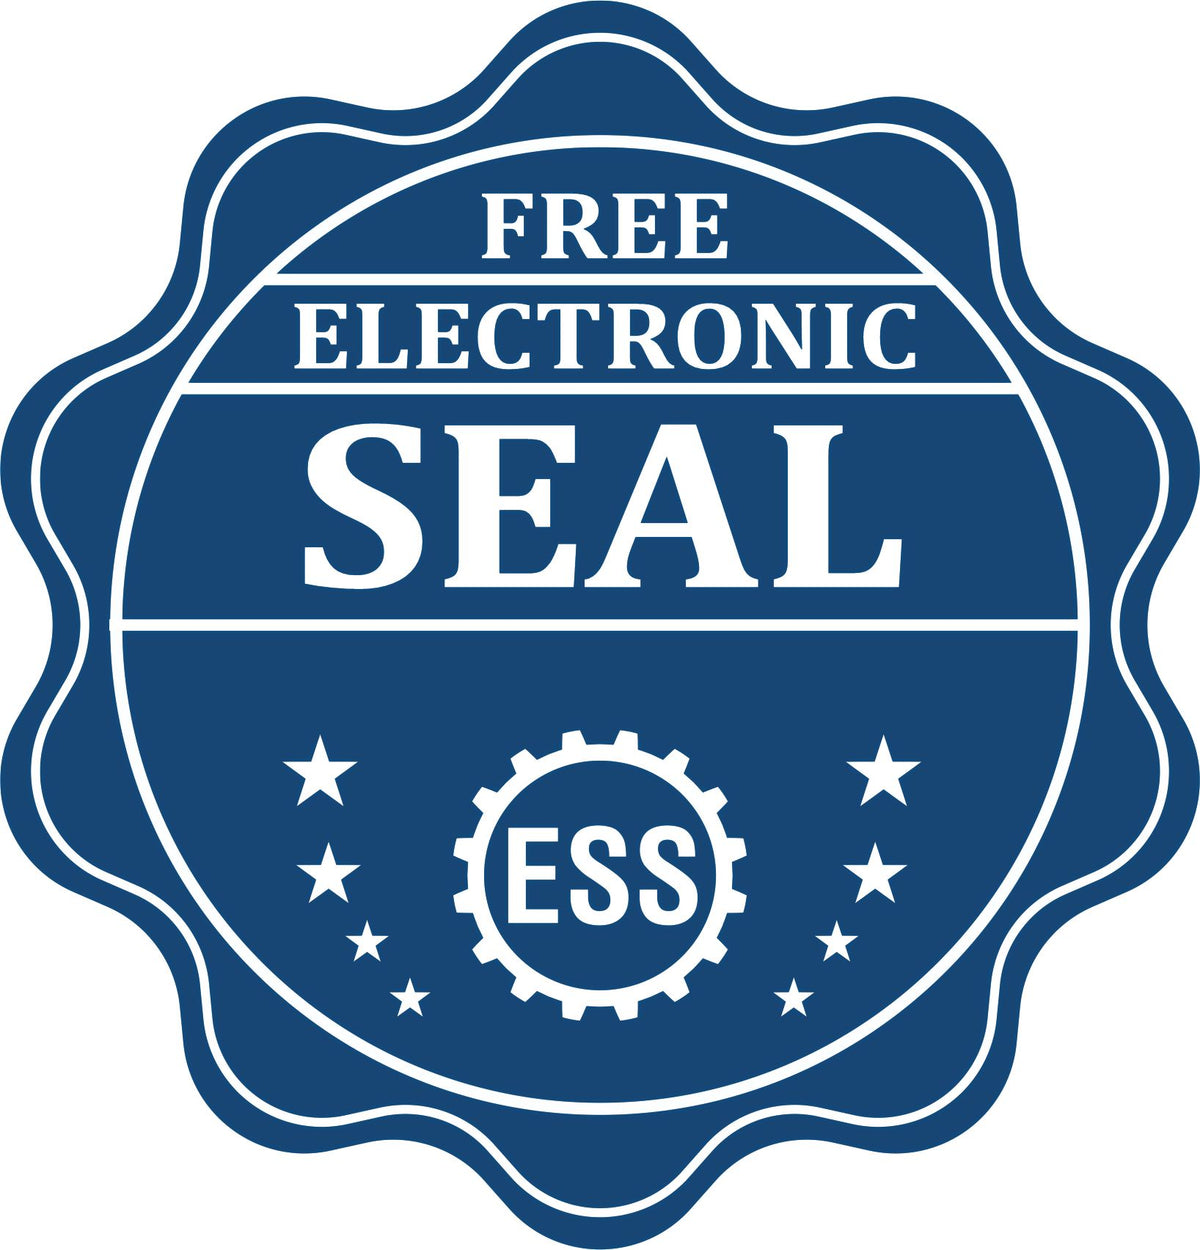 A badge showing a free electronic seal for the Slim Pre-Inked Virginia Professional Geologist Seal Stamp with stars and the ESS gear on the emblem.